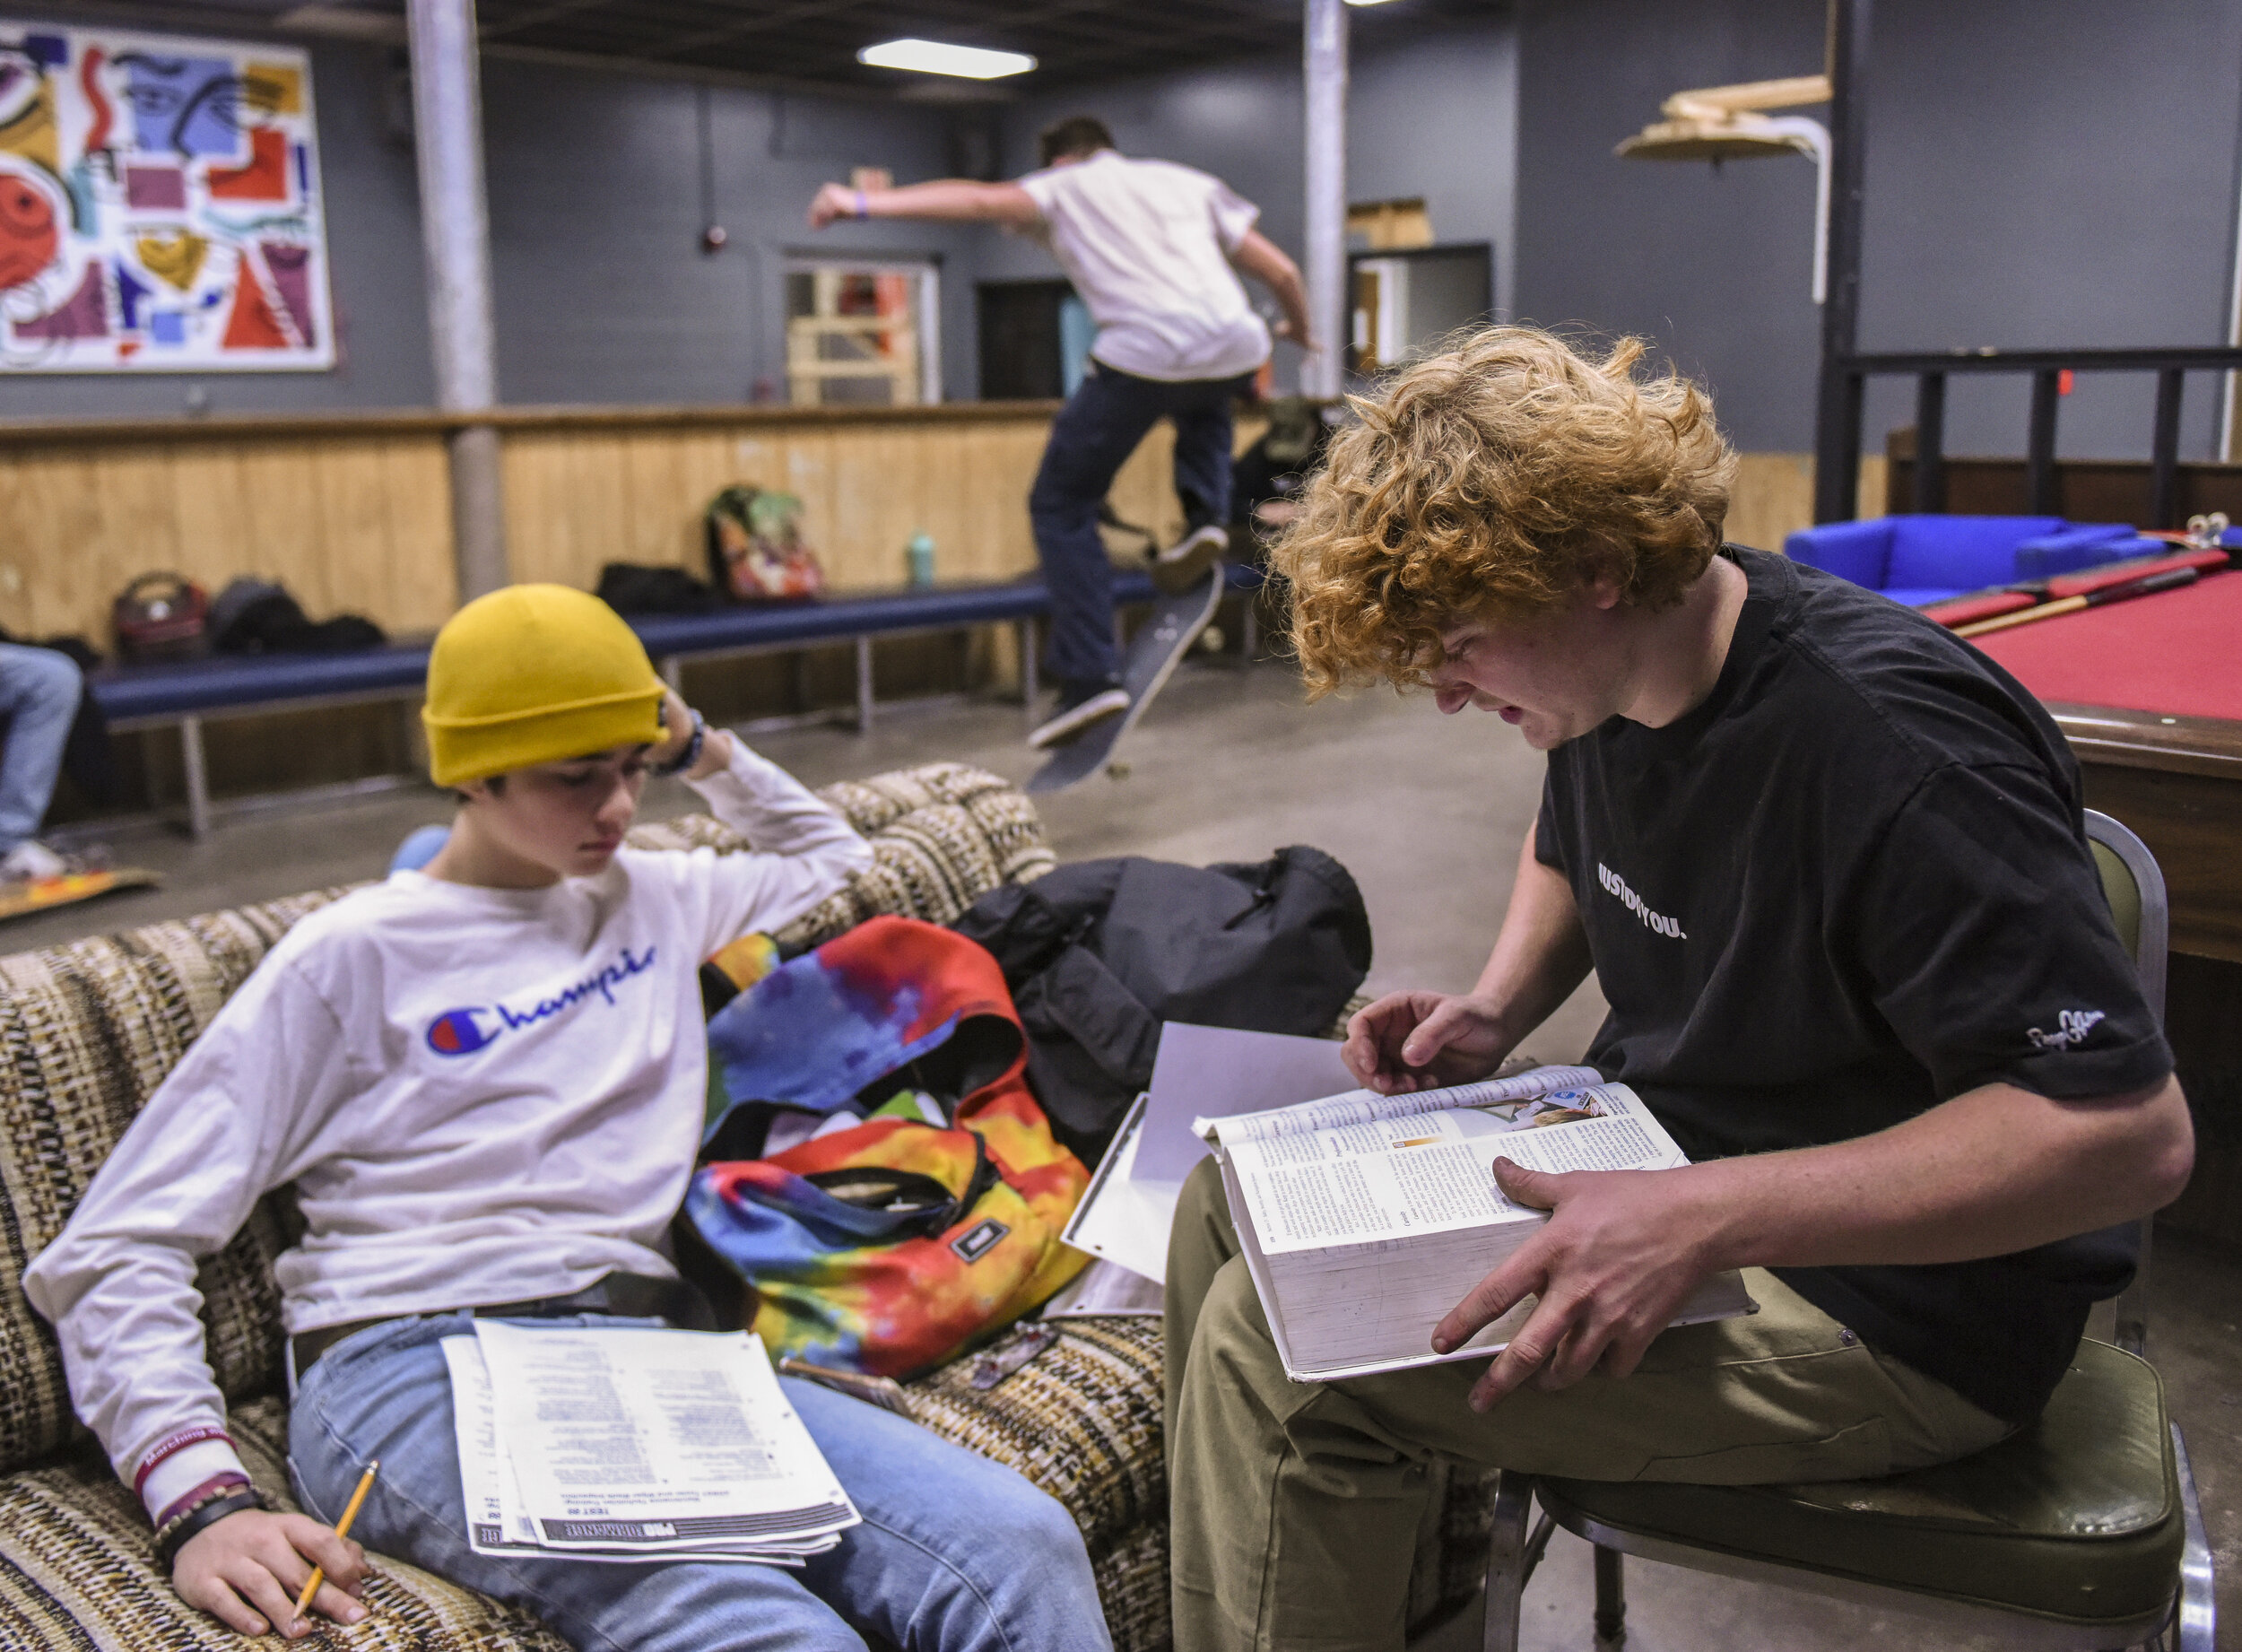  Brady Hovery, 14, of Davenport, receives help with his homework from Johnny Garrett 17, of Davenport, before they begin skating at The Center Dec. 11 in Davenport. 